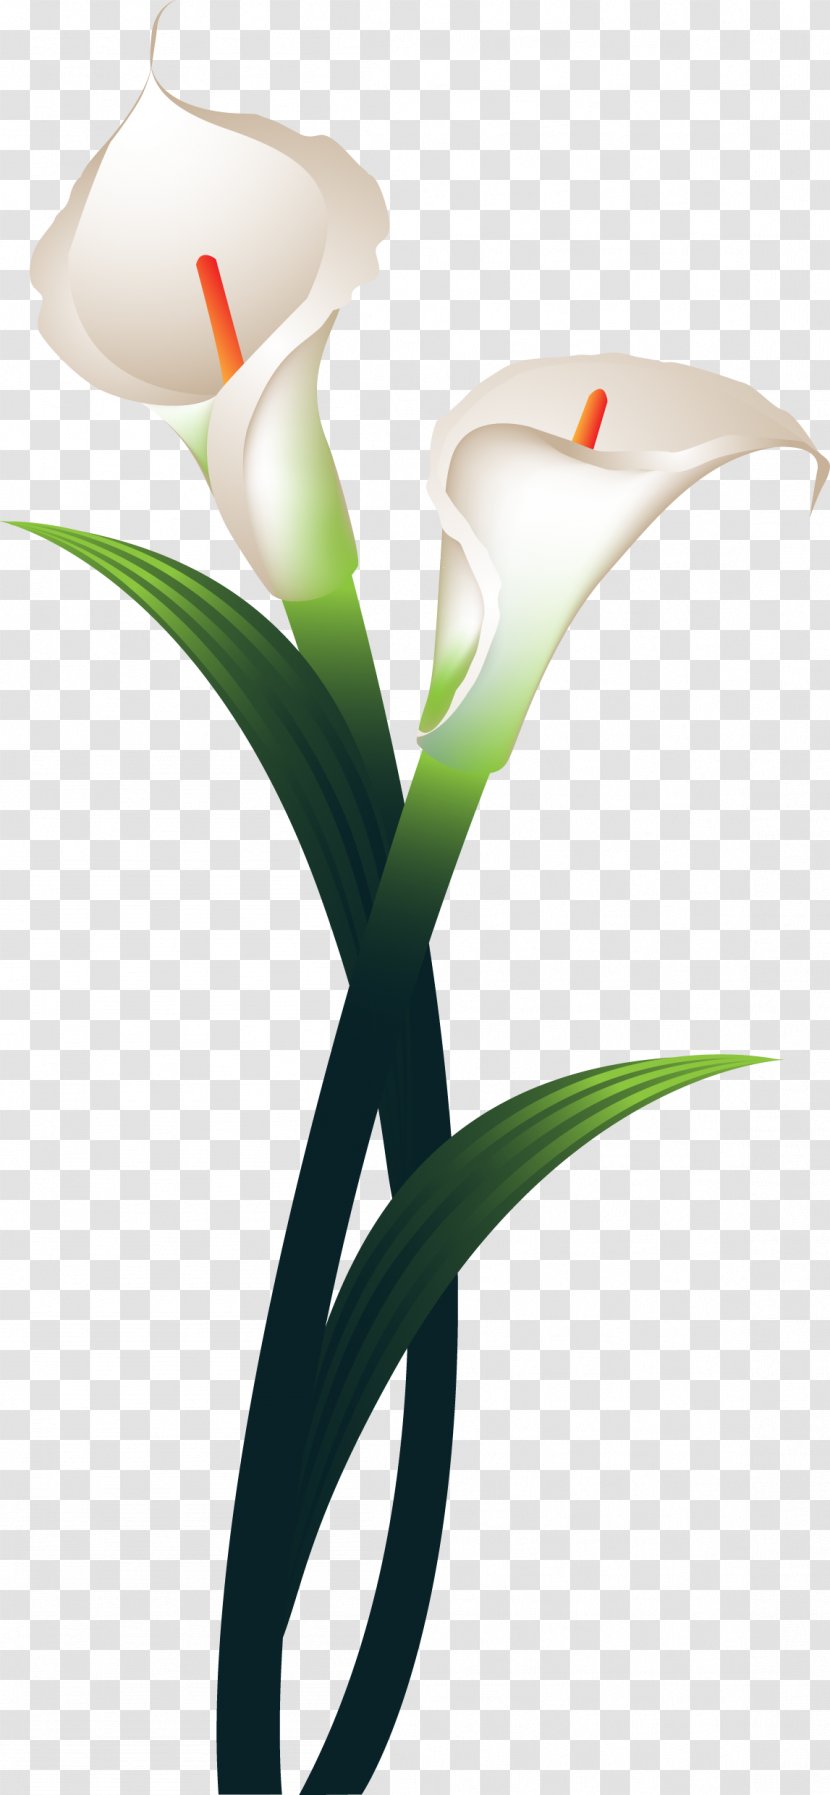 Flower Daffodil Plant Stem - Callalily Transparent PNG